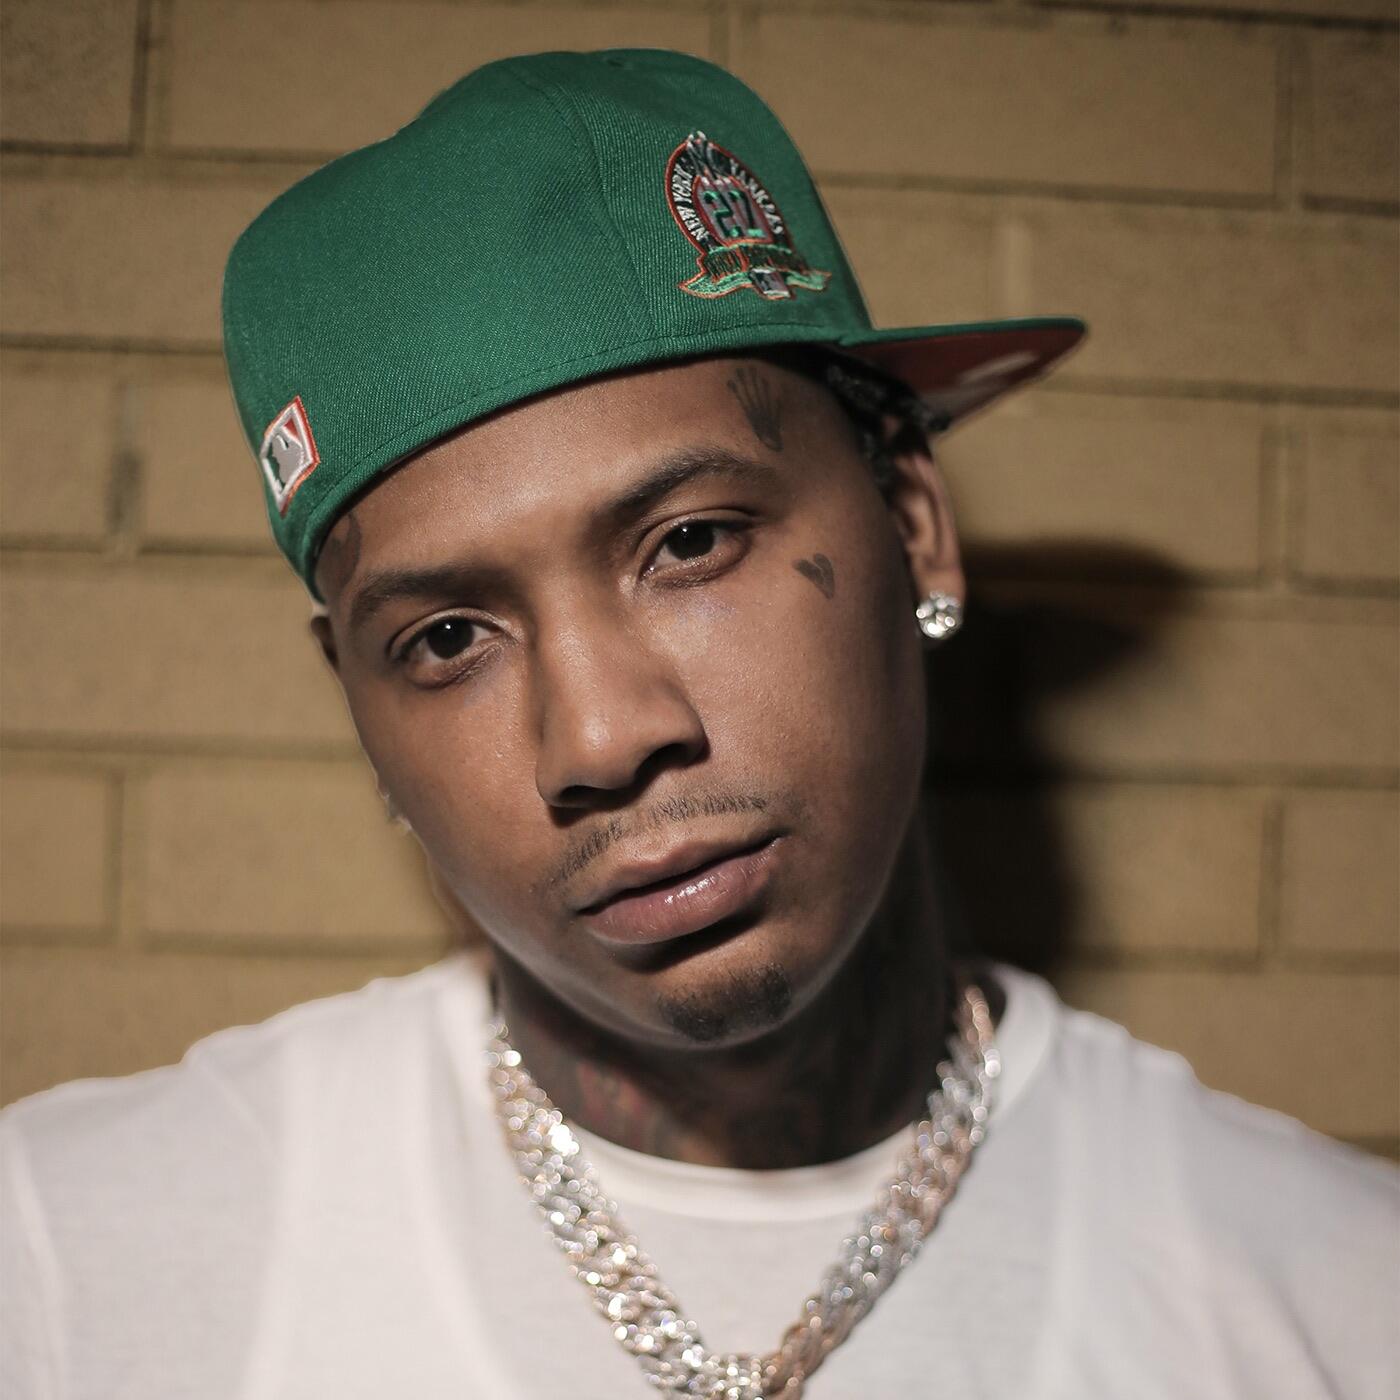 Moneybagg Yo: Clothes, Outfits, Brands, Style and Looks